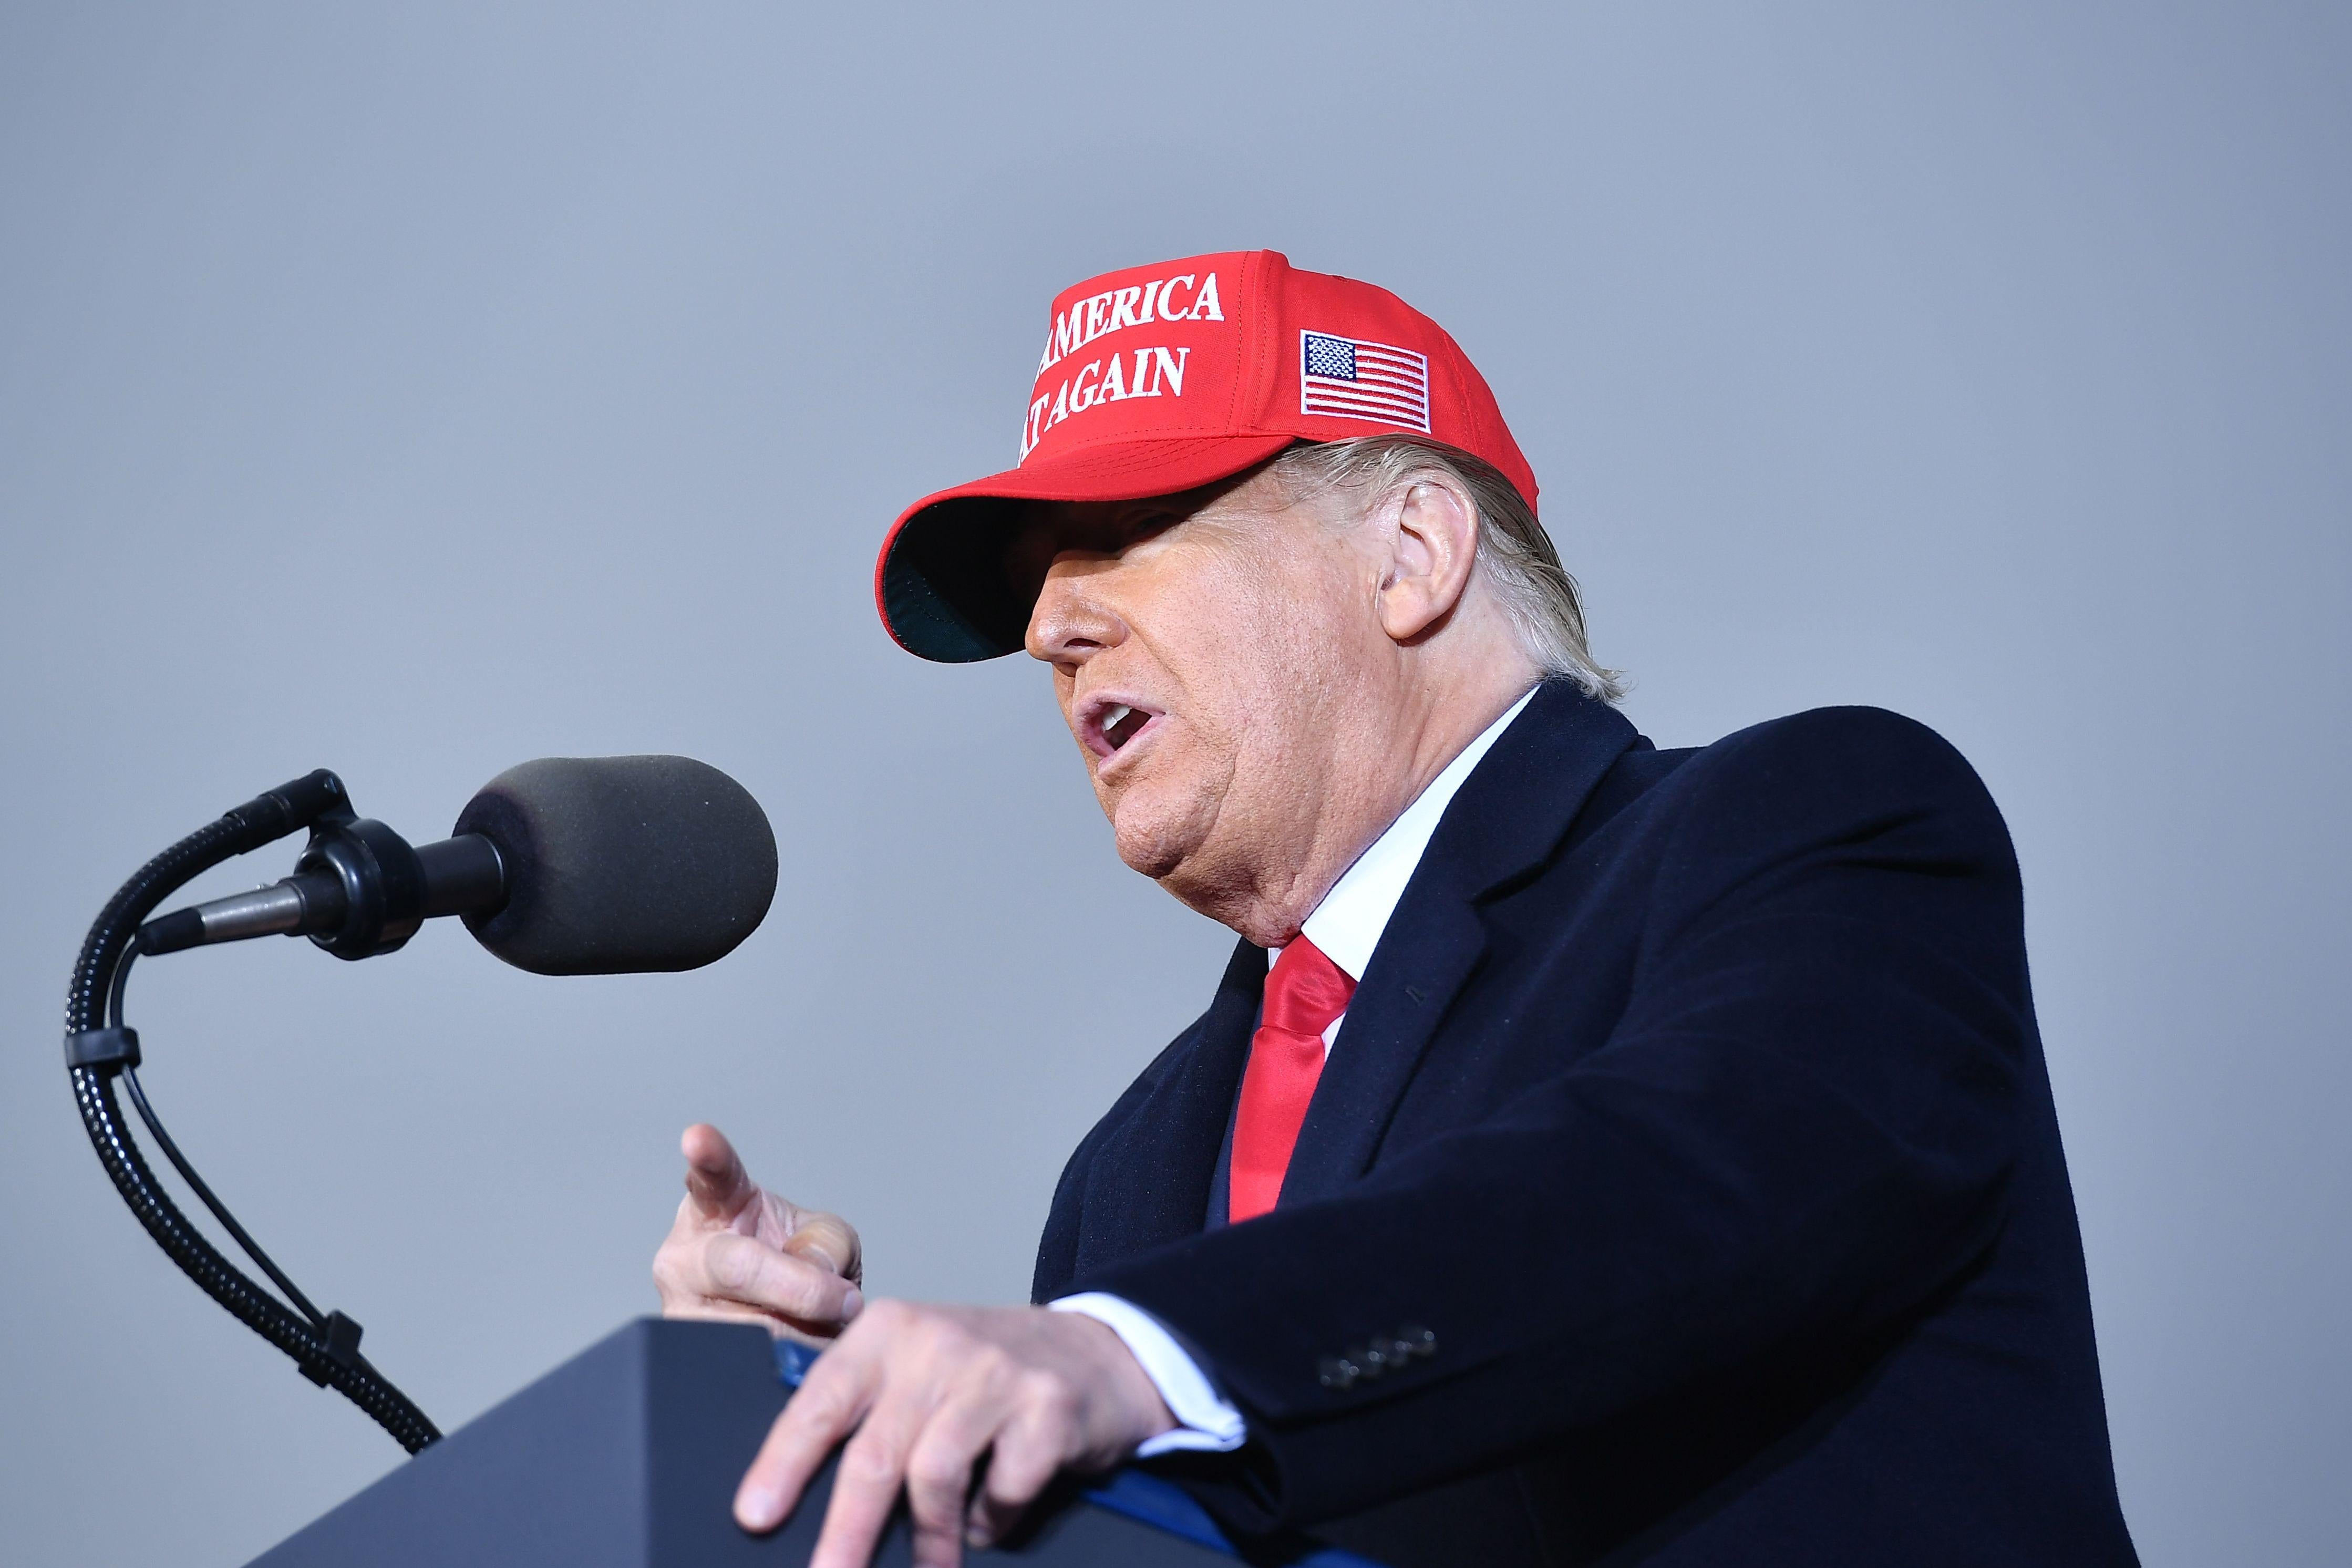 Donald Trump speaks into a microphone at a podium while wearing a red MAGA hat.